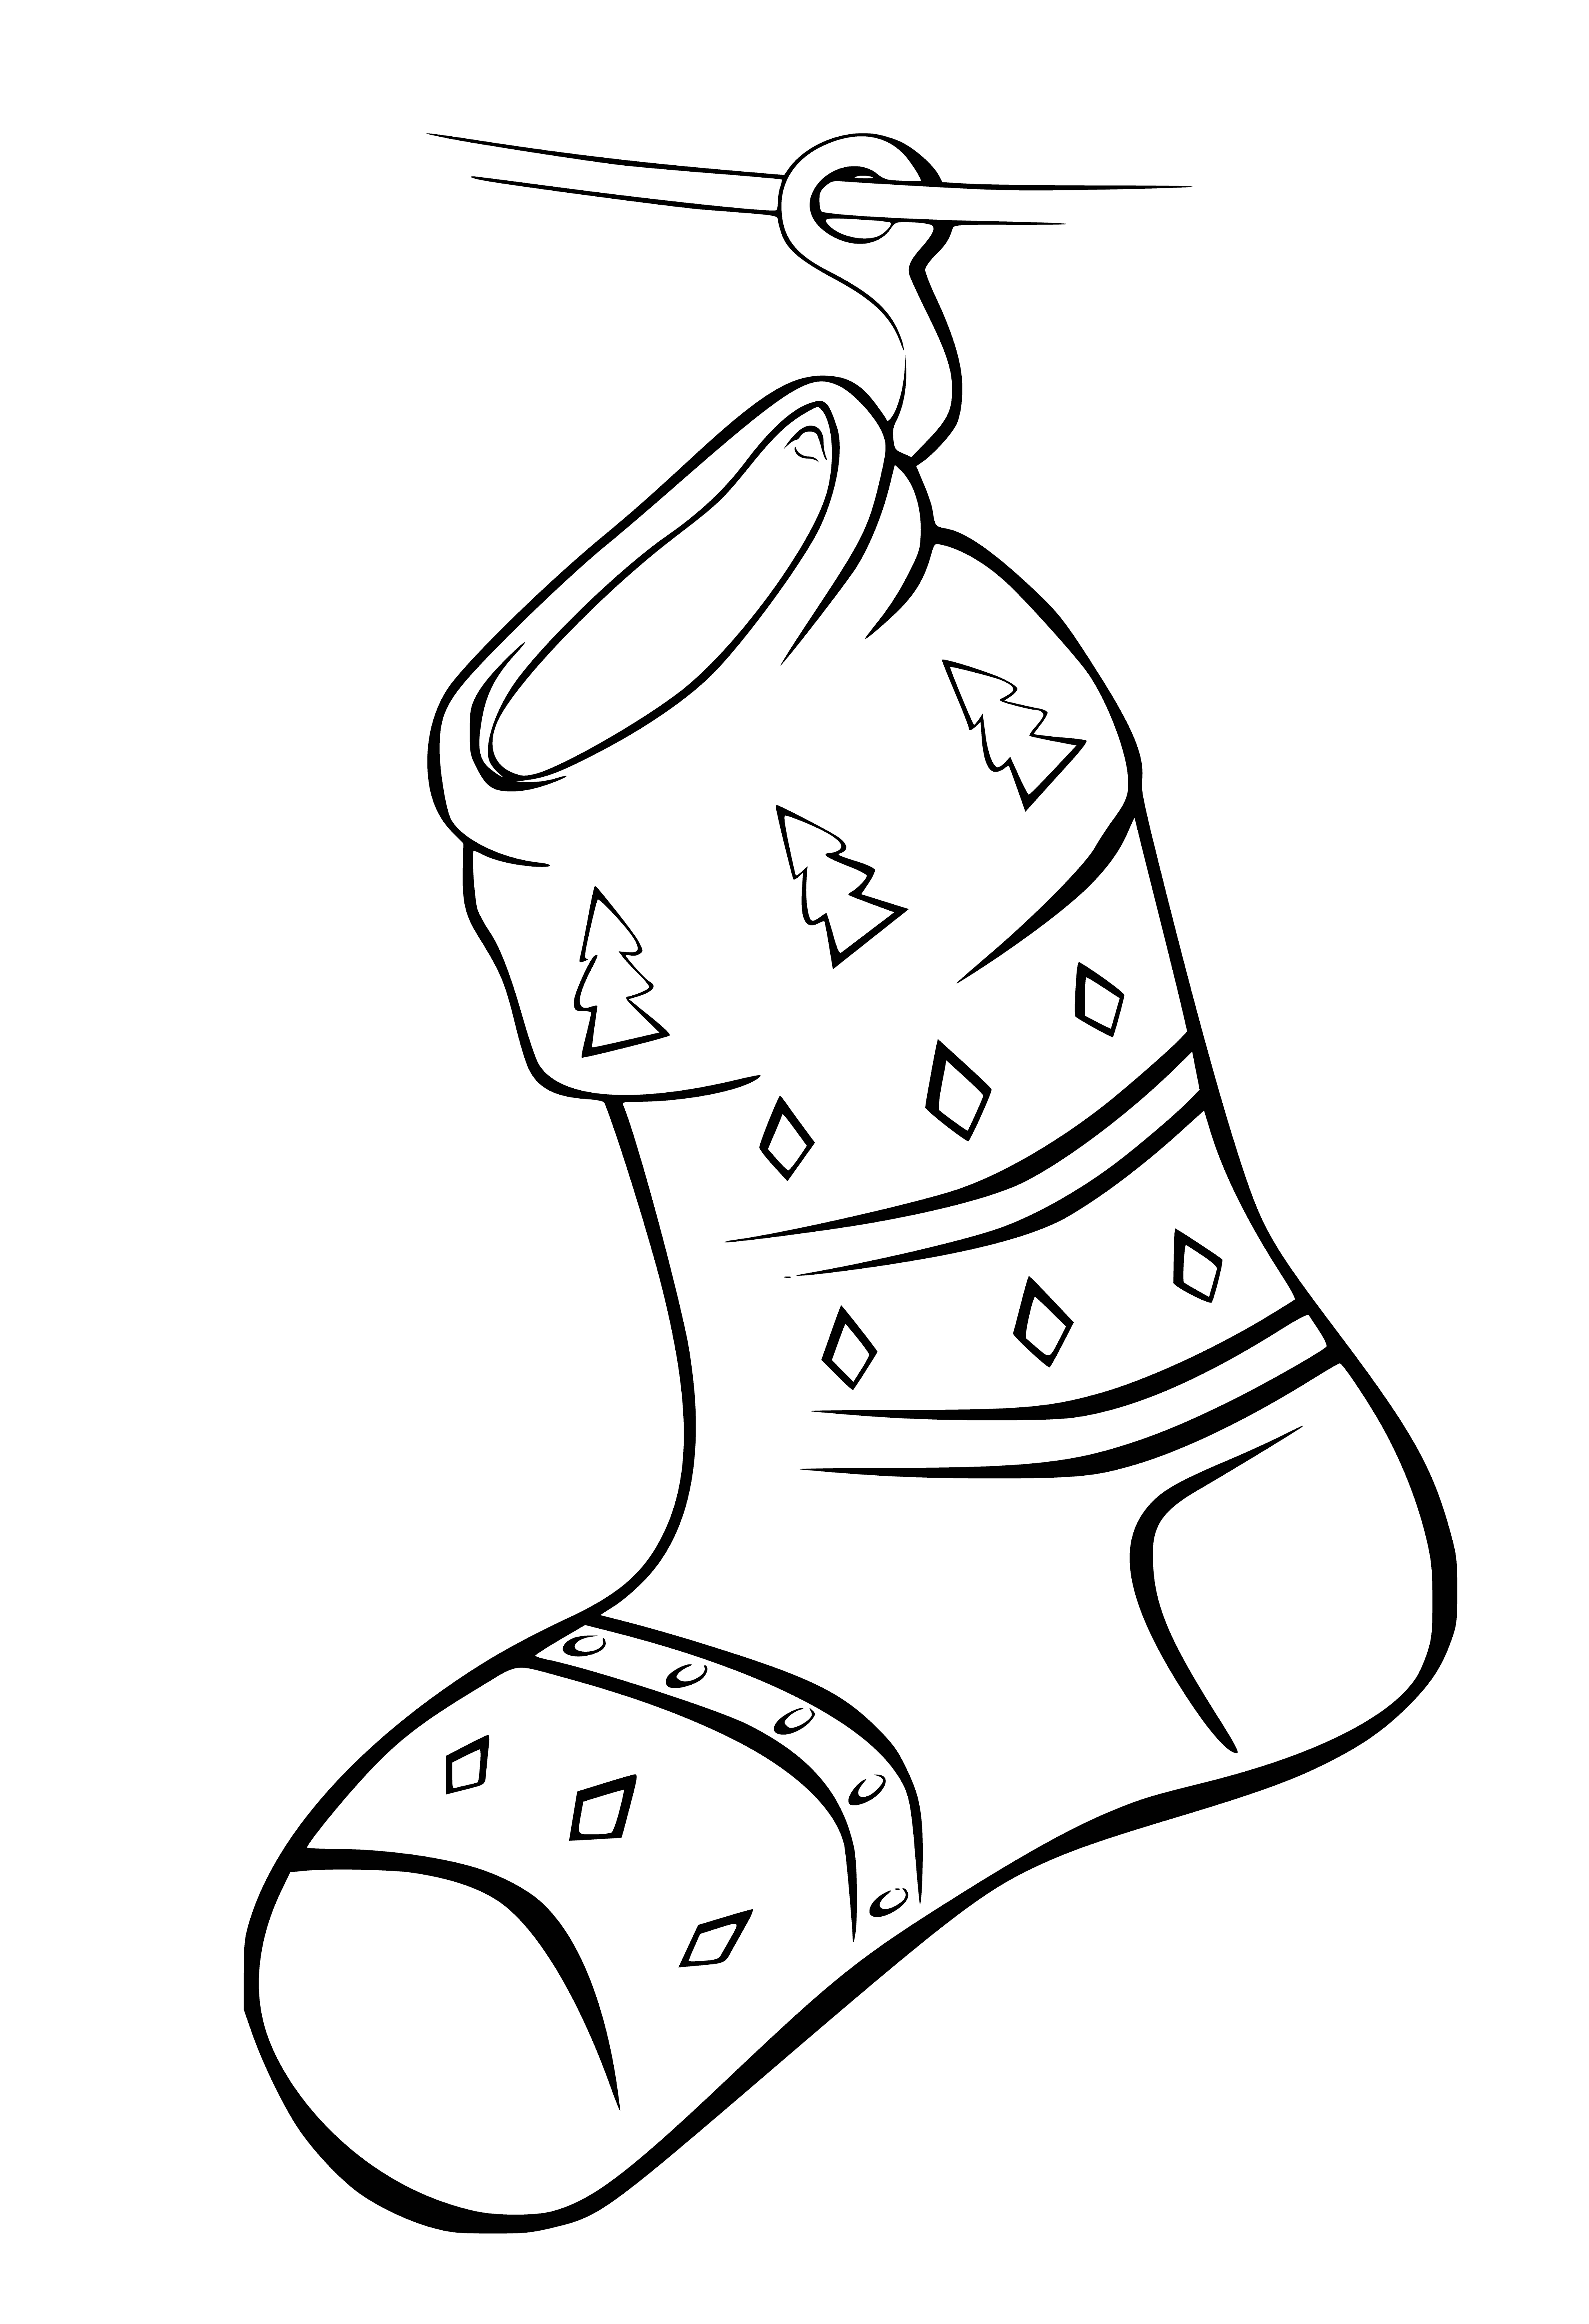 coloring page: Red socks on the fireplace.